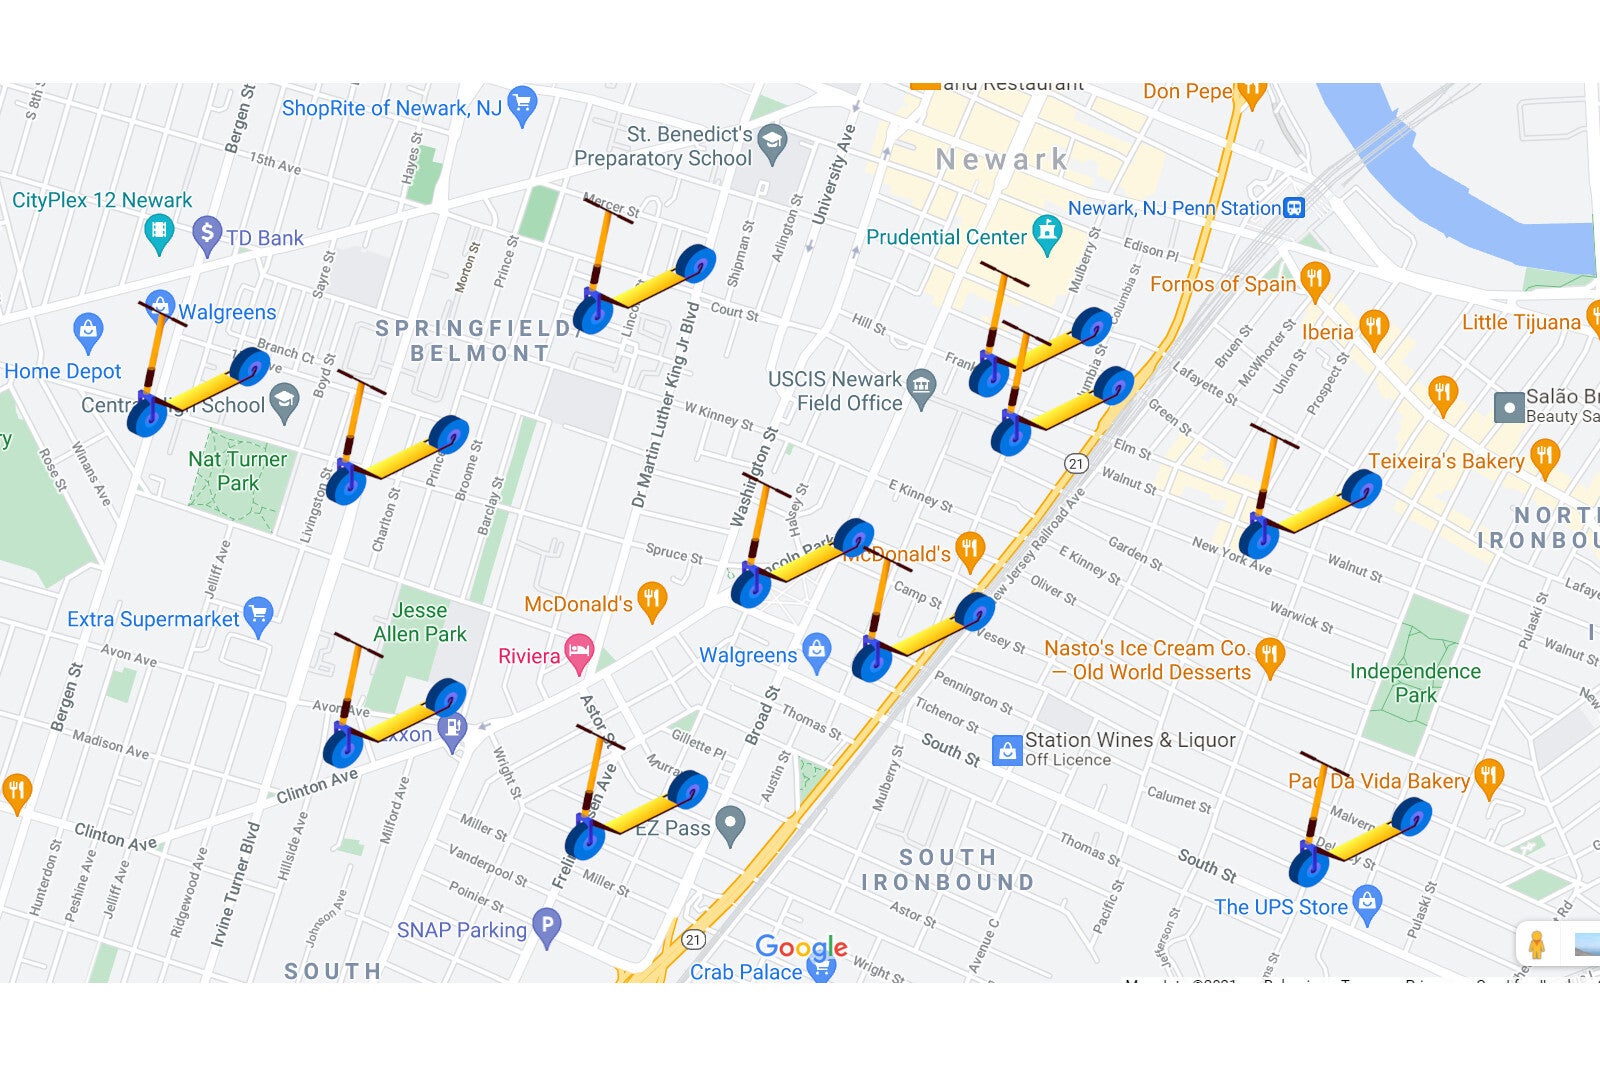 This is a visual only - not an actual representation of the app update - Google Maps integrates new e-bike, scooter rentals